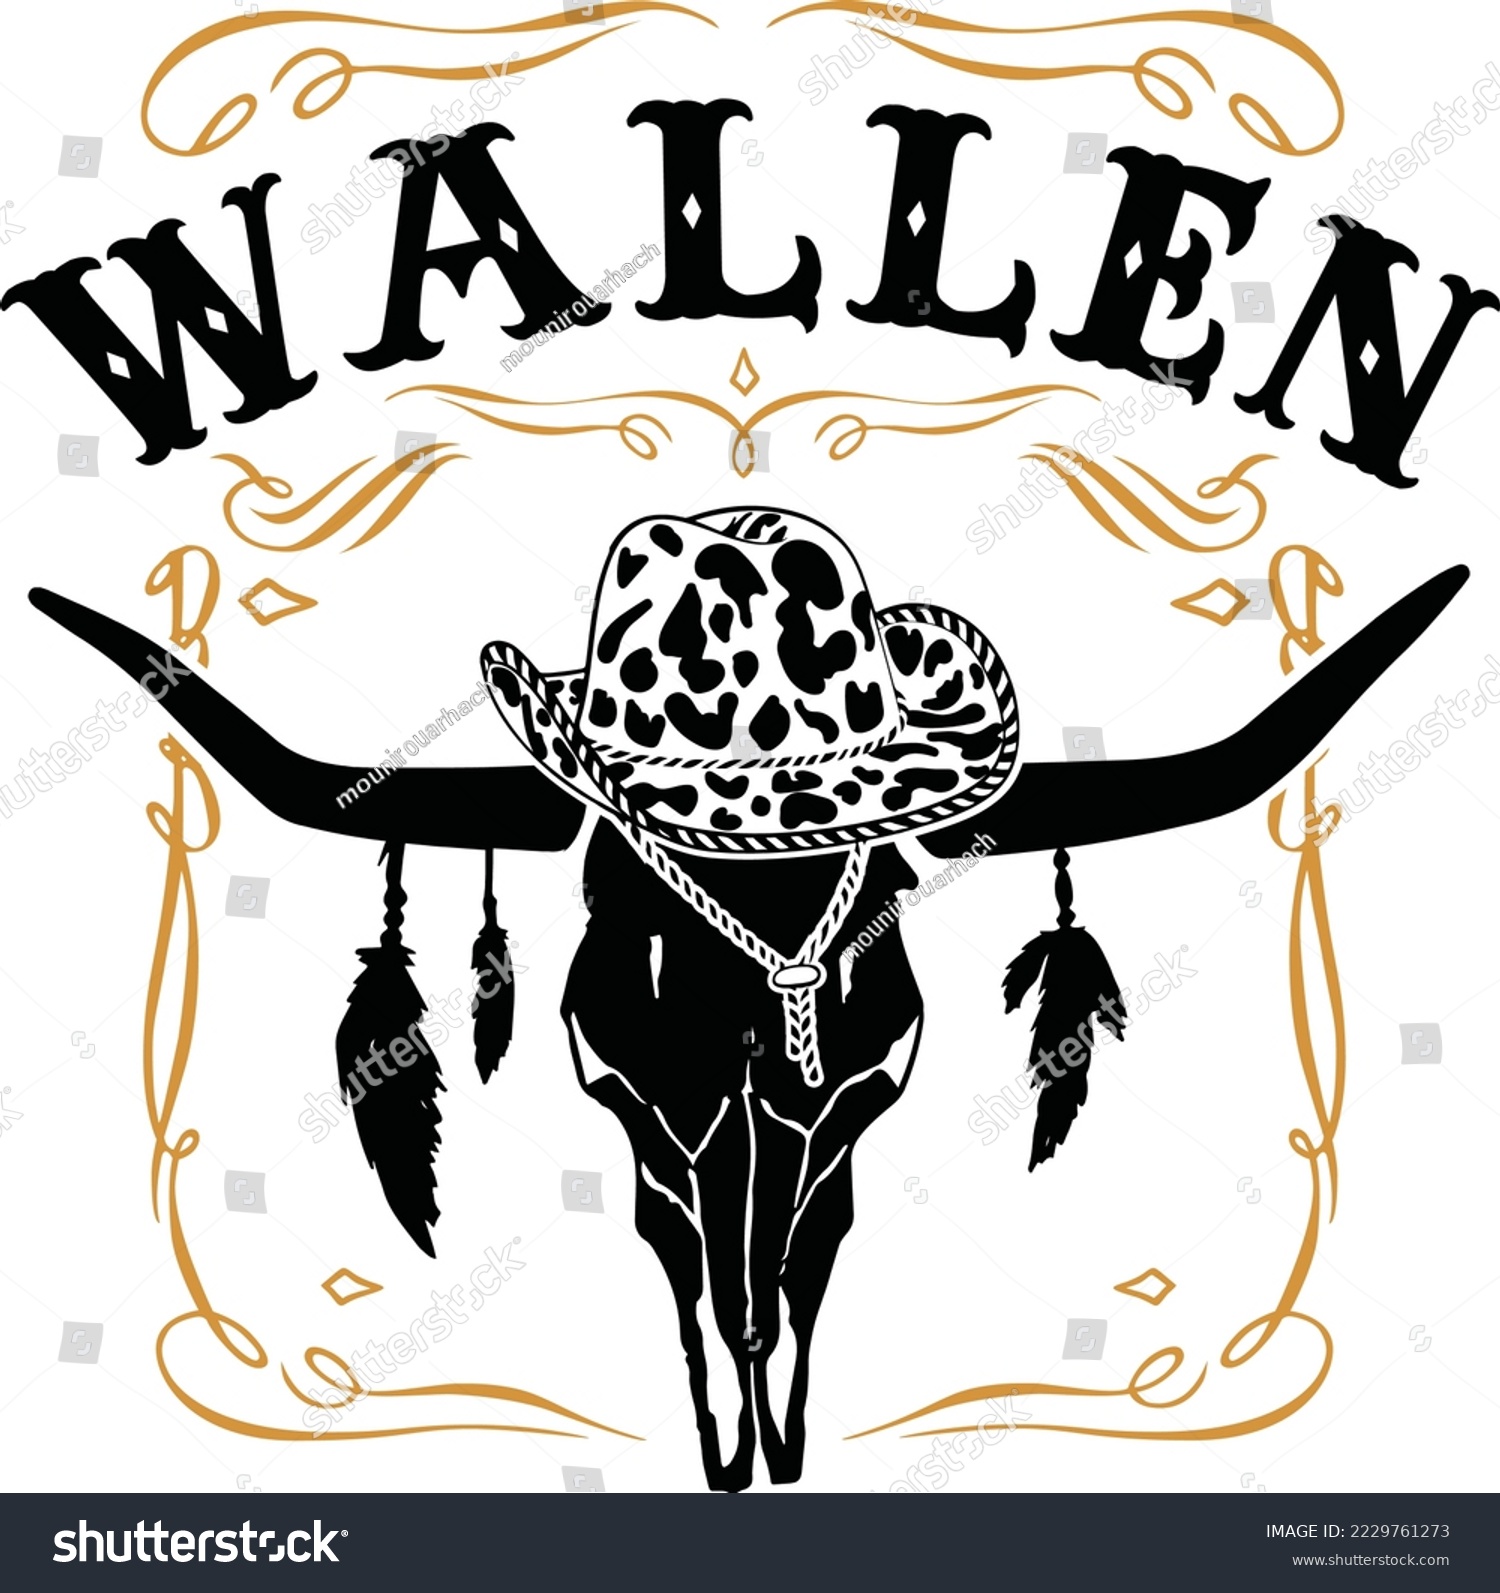 SVG of wallen bull skull yellow and black design in a white background 02 svg